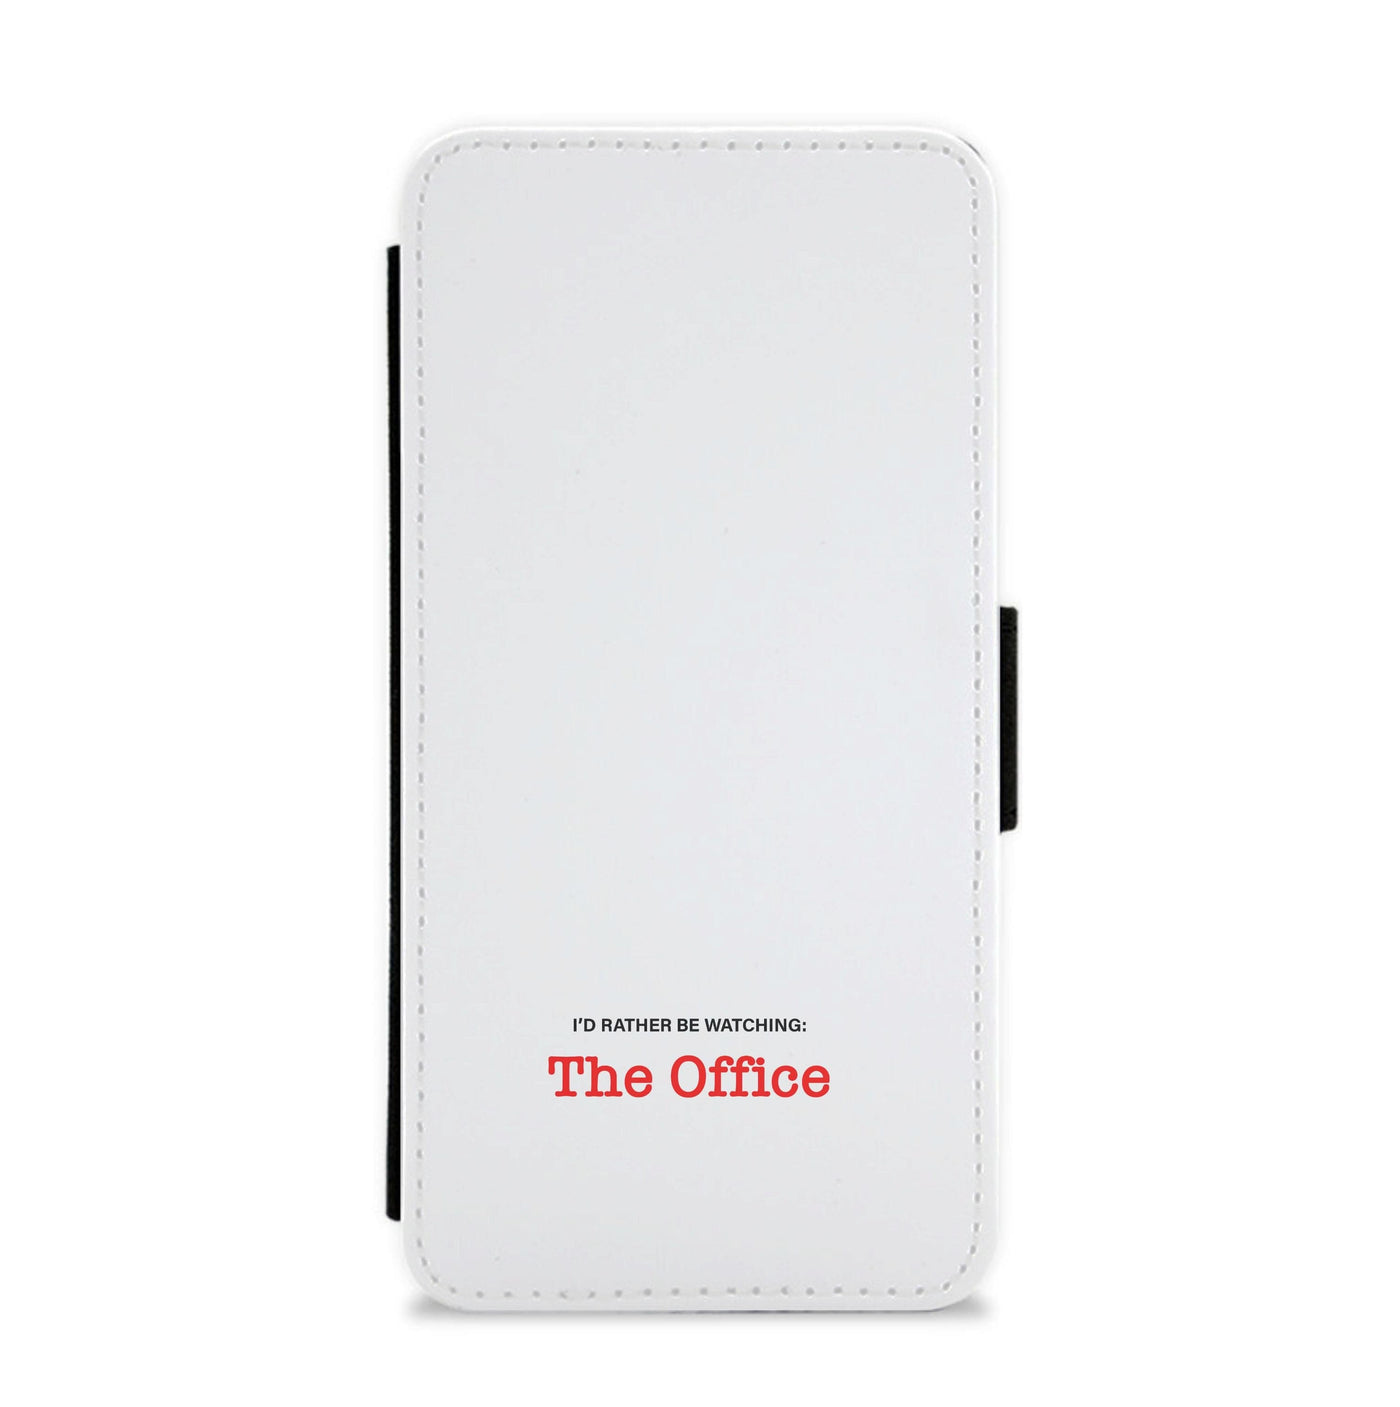 I'd Rather Be Watching The Office - The Office Flip / Wallet Phone Case